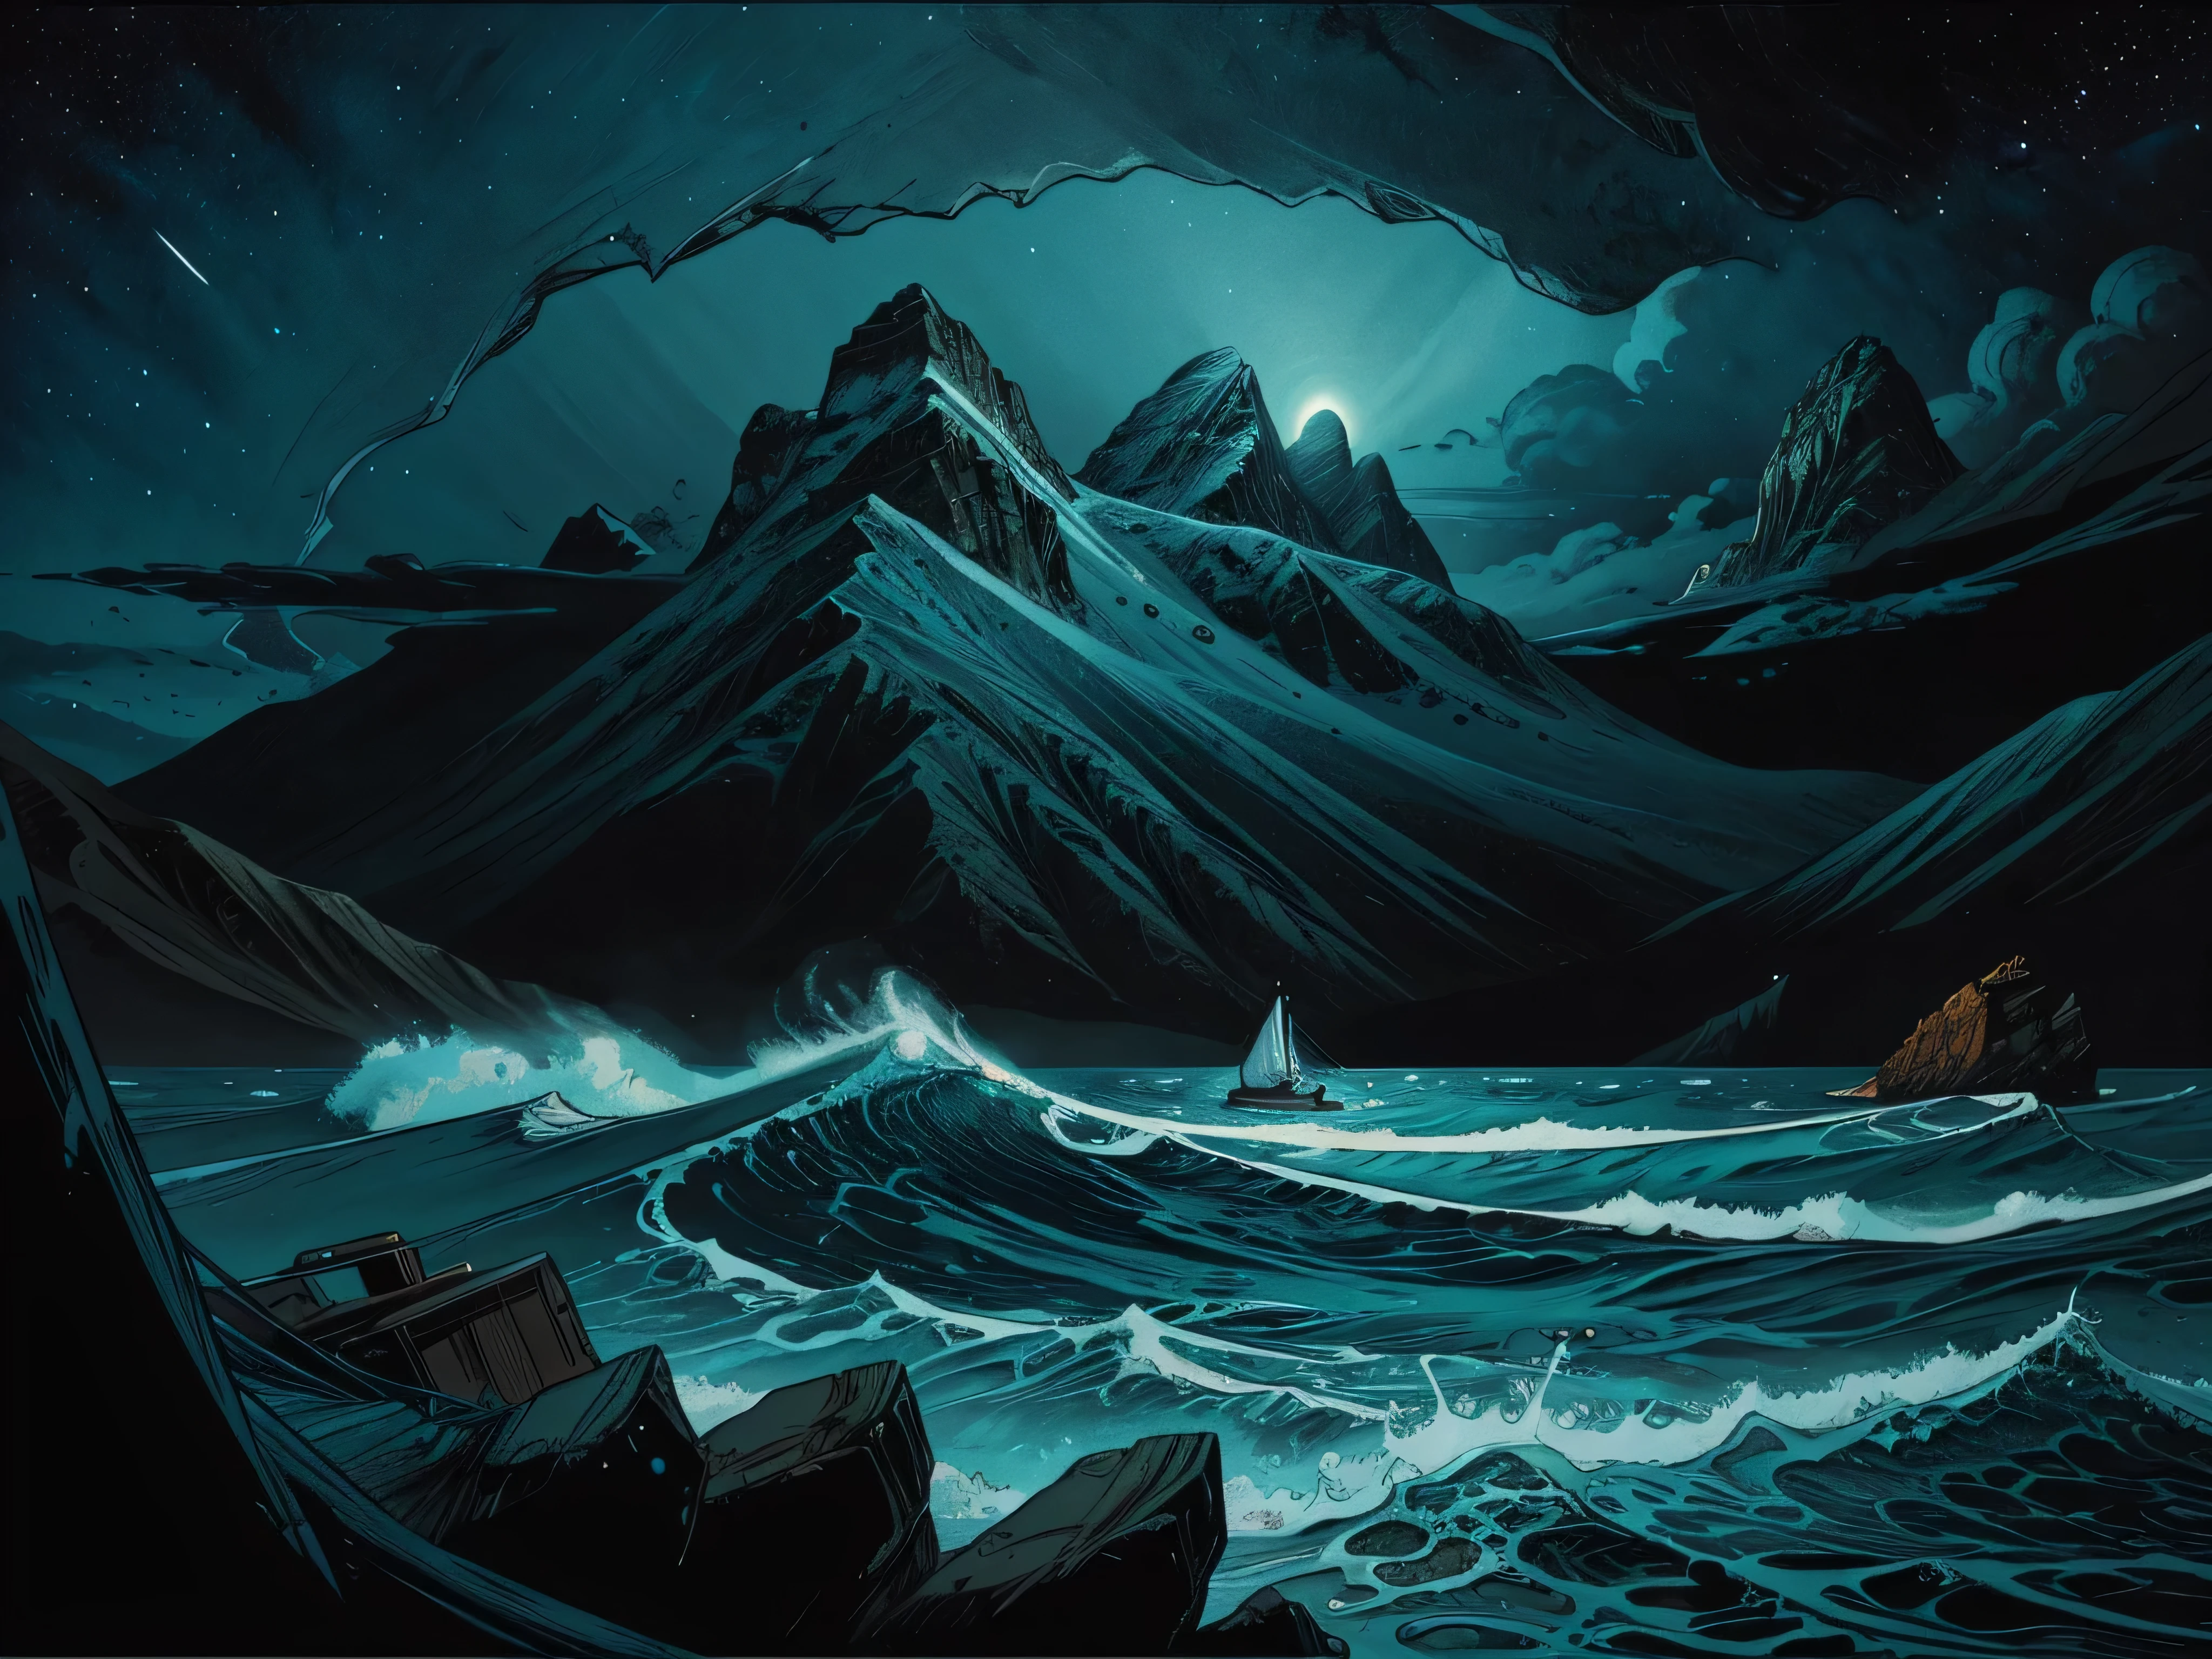 there is a painting of a ship in the ocean with mountains in the background, detailed dreamscape, inspired by Kilian Eng, calm night. digital illustration, full art illustration, dan mumford and alex grey style, by Kilian Eng, detailed digital illustration, a beautiful artwork illustration, g liulian art style, an ominous fantasy illustration, detailed fantasy illustration